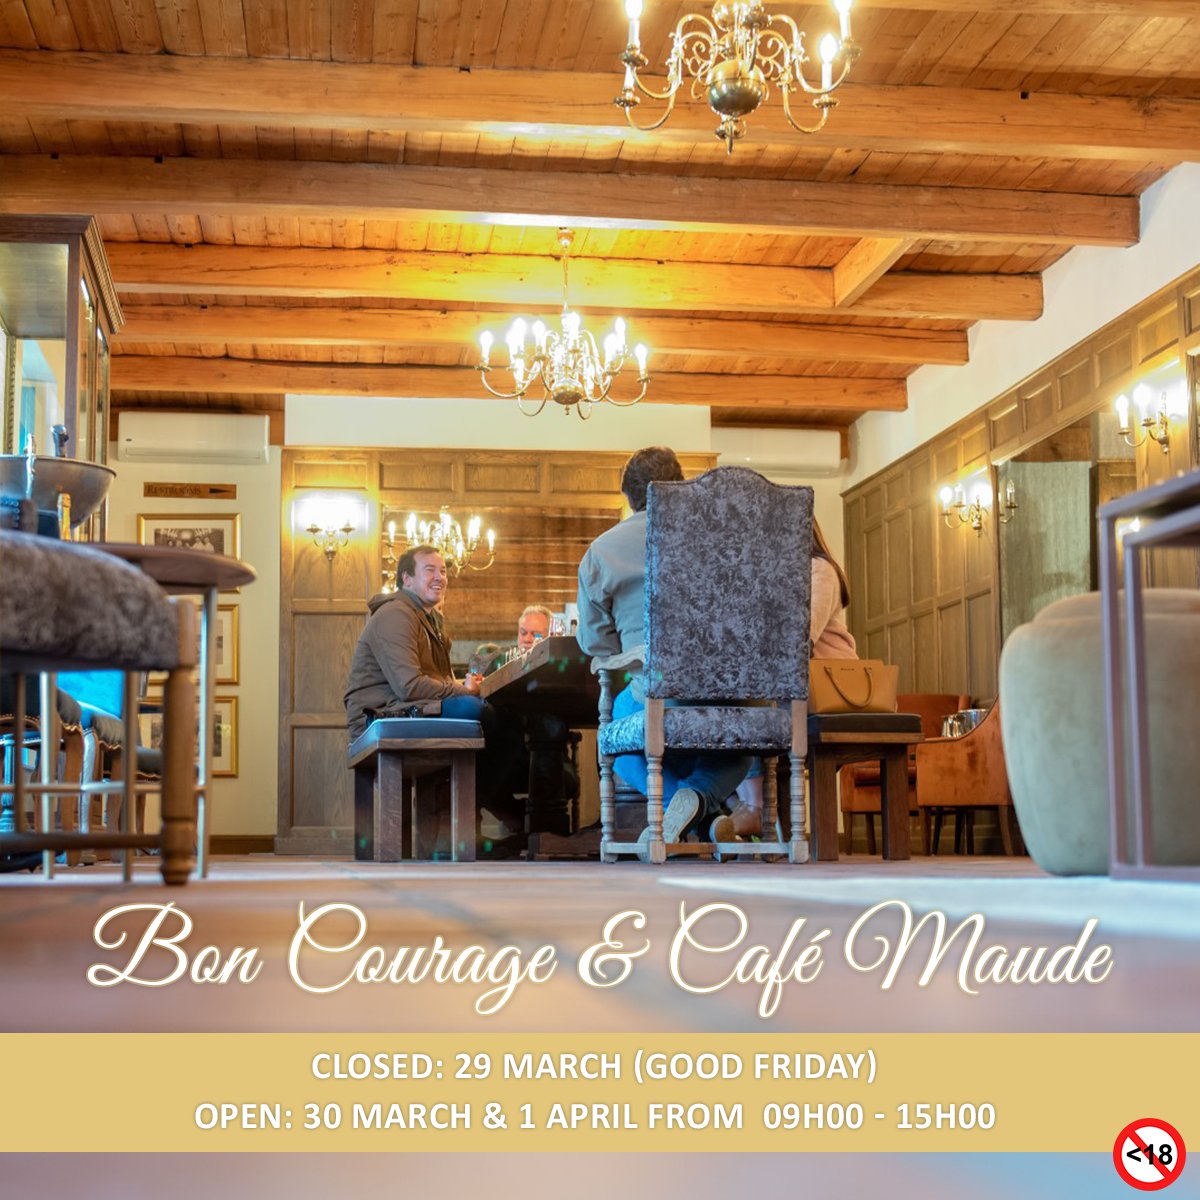 Please take NOTE of our operating hours for the following dates: 📆 CLOSED 29th March (Good Friday) OPEN ⏰ 09:00 - 15:00 🥂 30th March 👨‍👩‍👦1st April (Family Day) See you soon! 🥳 #boncourage #exceptionalquality #wine #tasting #easterweekend #familyday #holidays